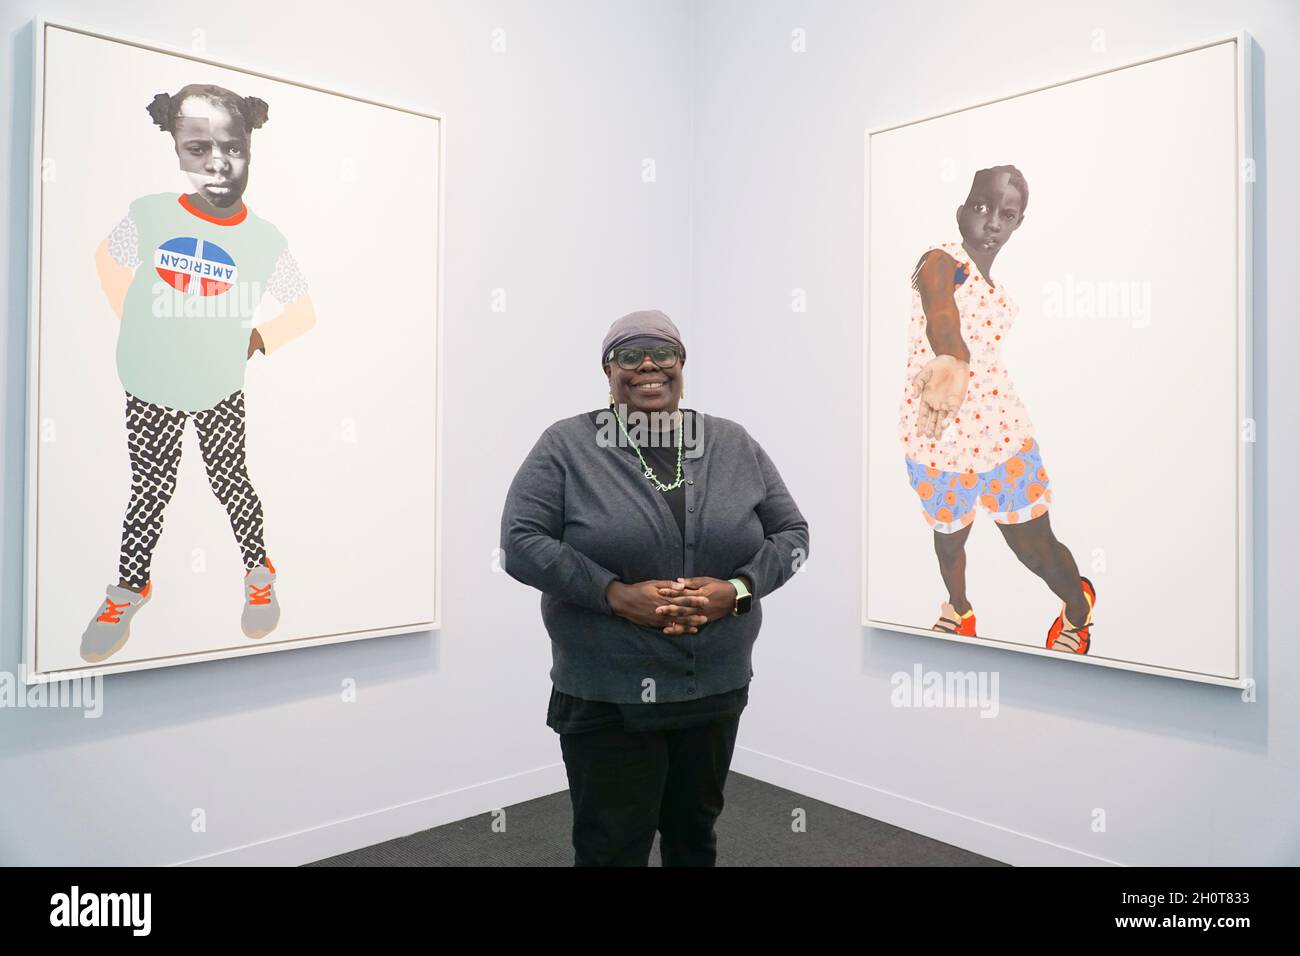 London, UK, 14 October 2021: Frieze art fair opens in London with contemporary art from around the world. American artist Deborah Roberts has a presentation of her distinctive style of paintings using collage and mixed media. Anna Watson/Alamy Live News Stock Photo